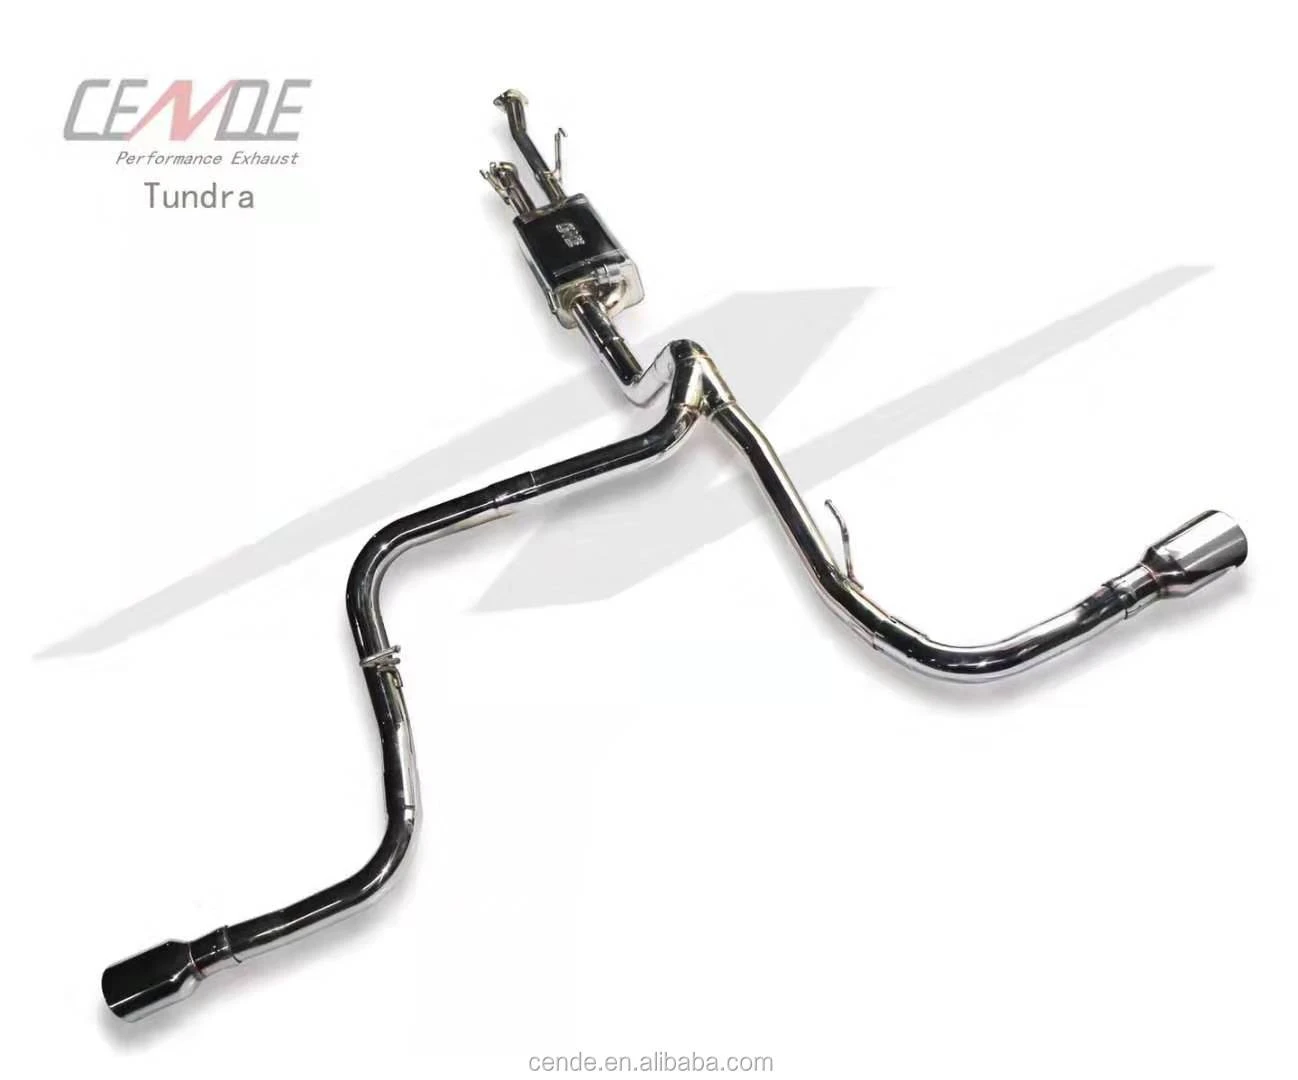 Active sound catback downpipe header exhaust system for Toyota Tundra exhaust